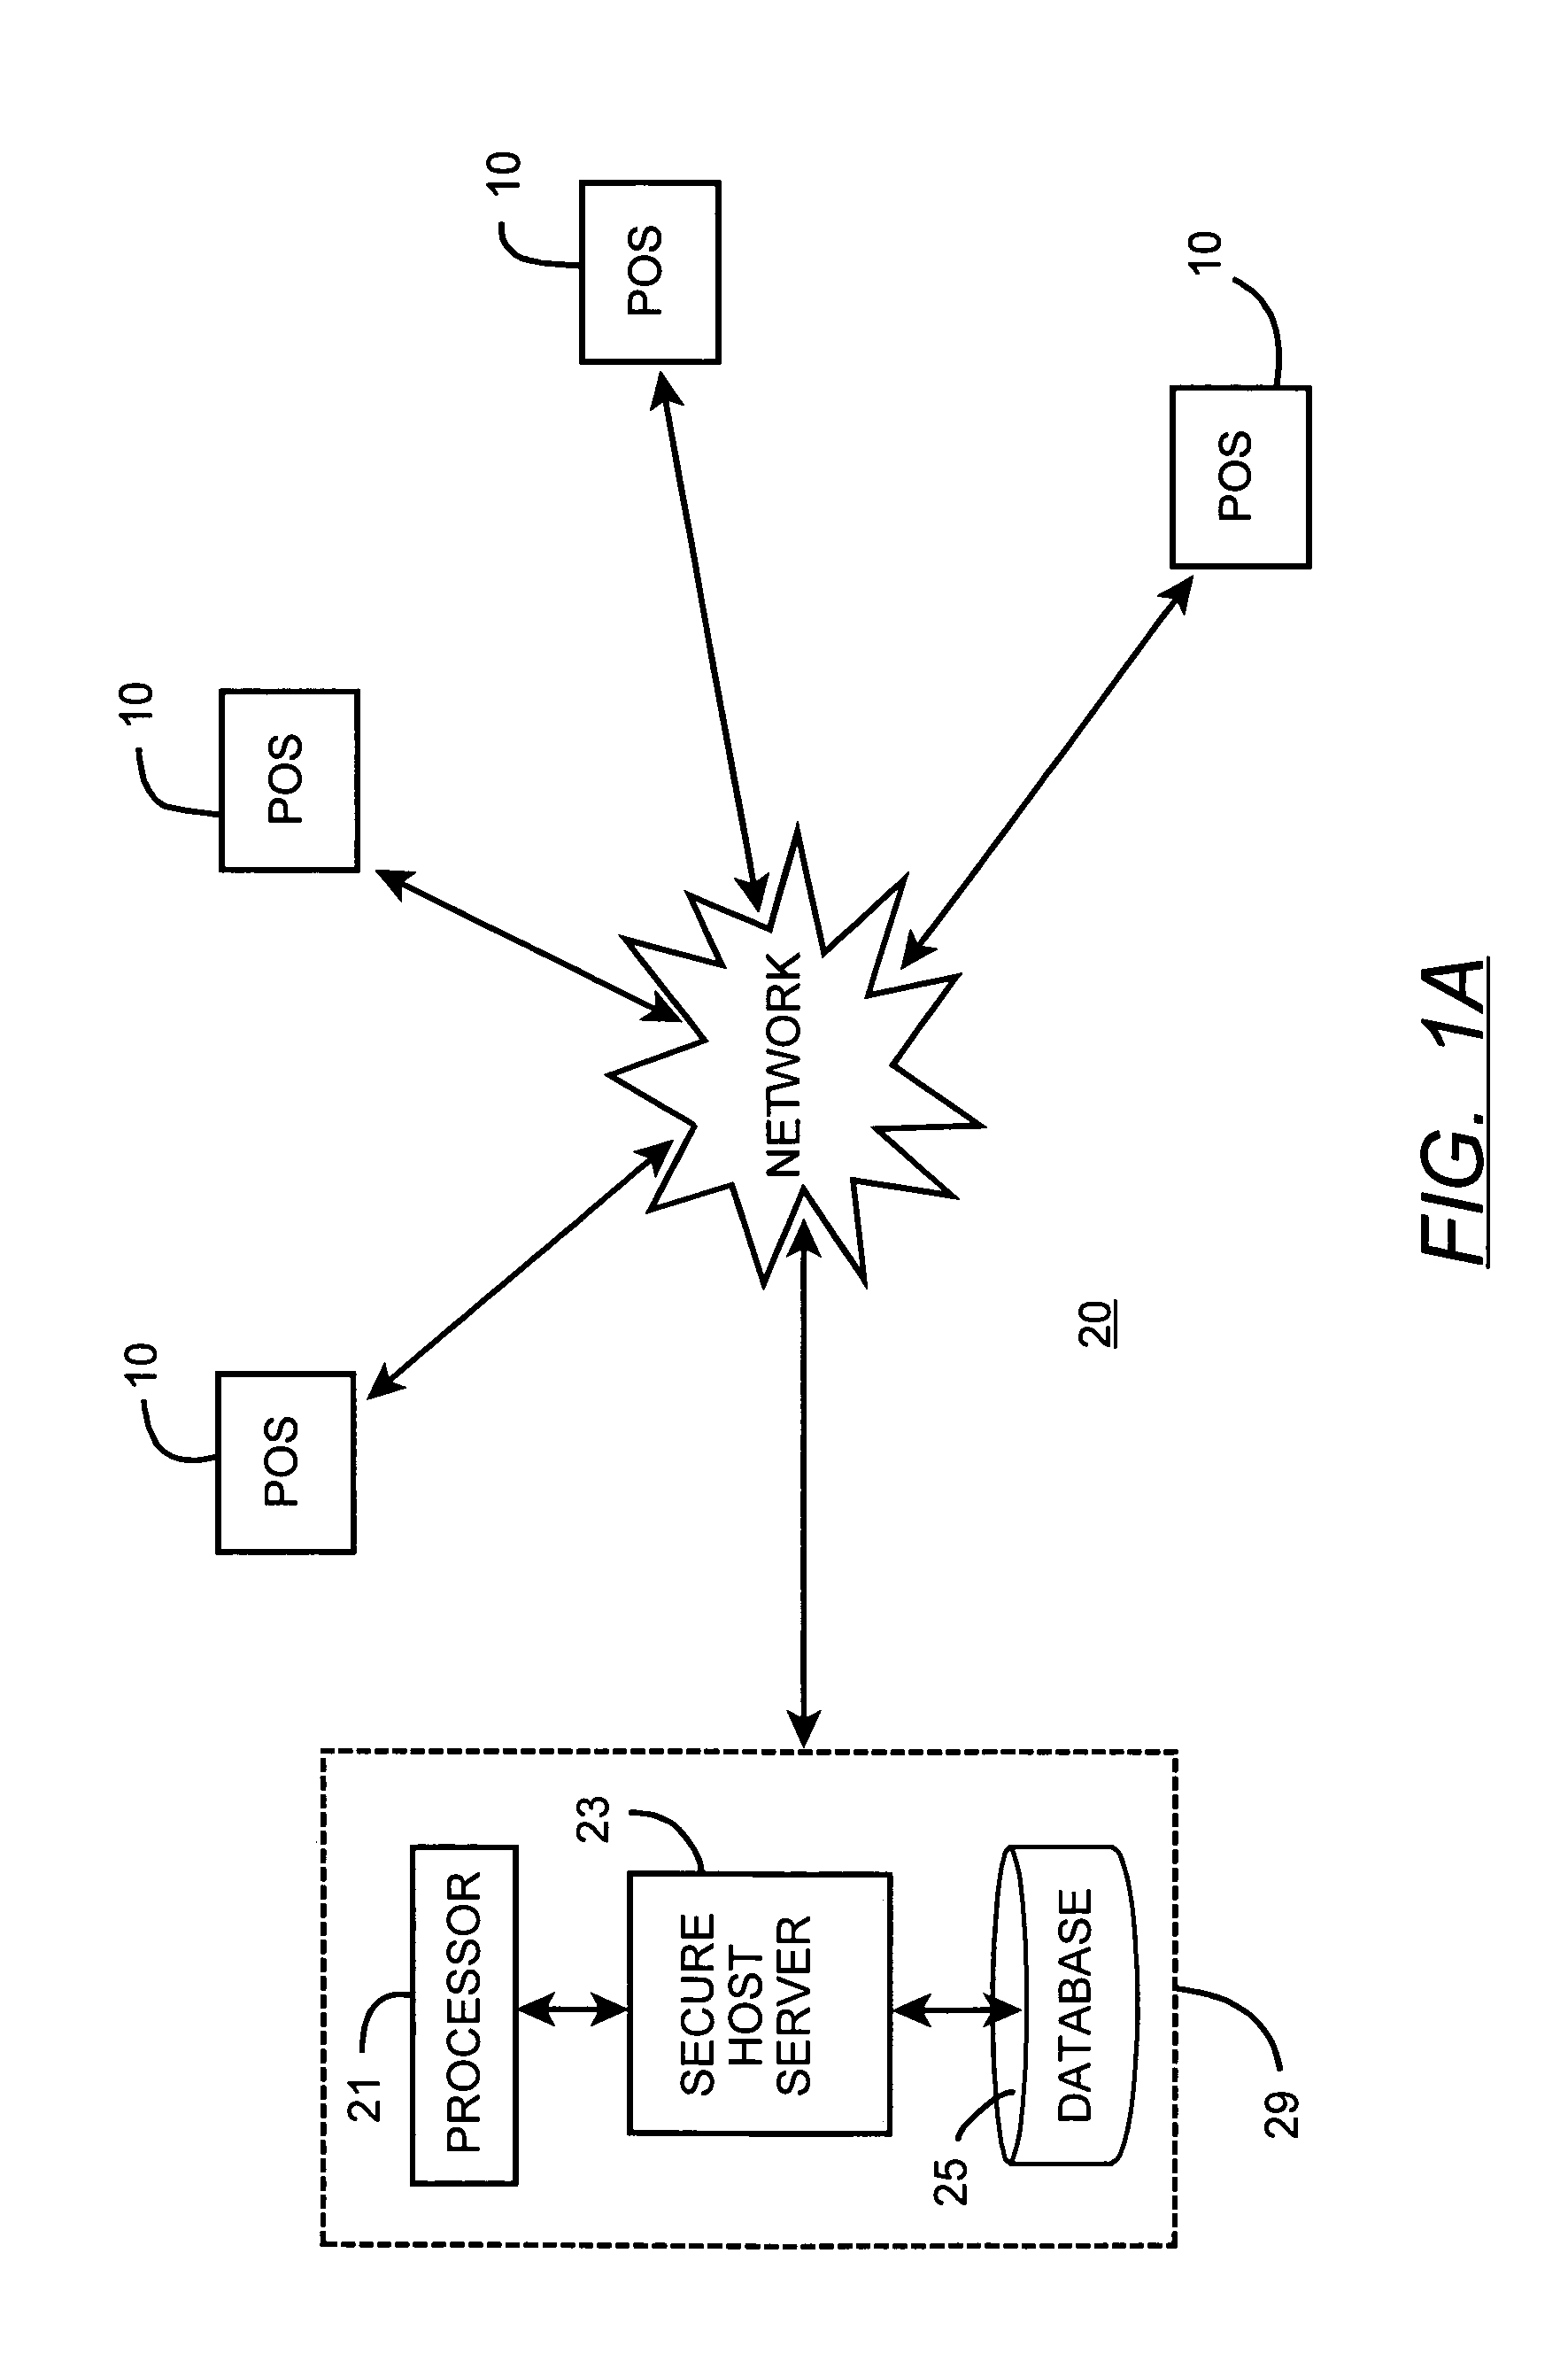 System and method for debit account transactions